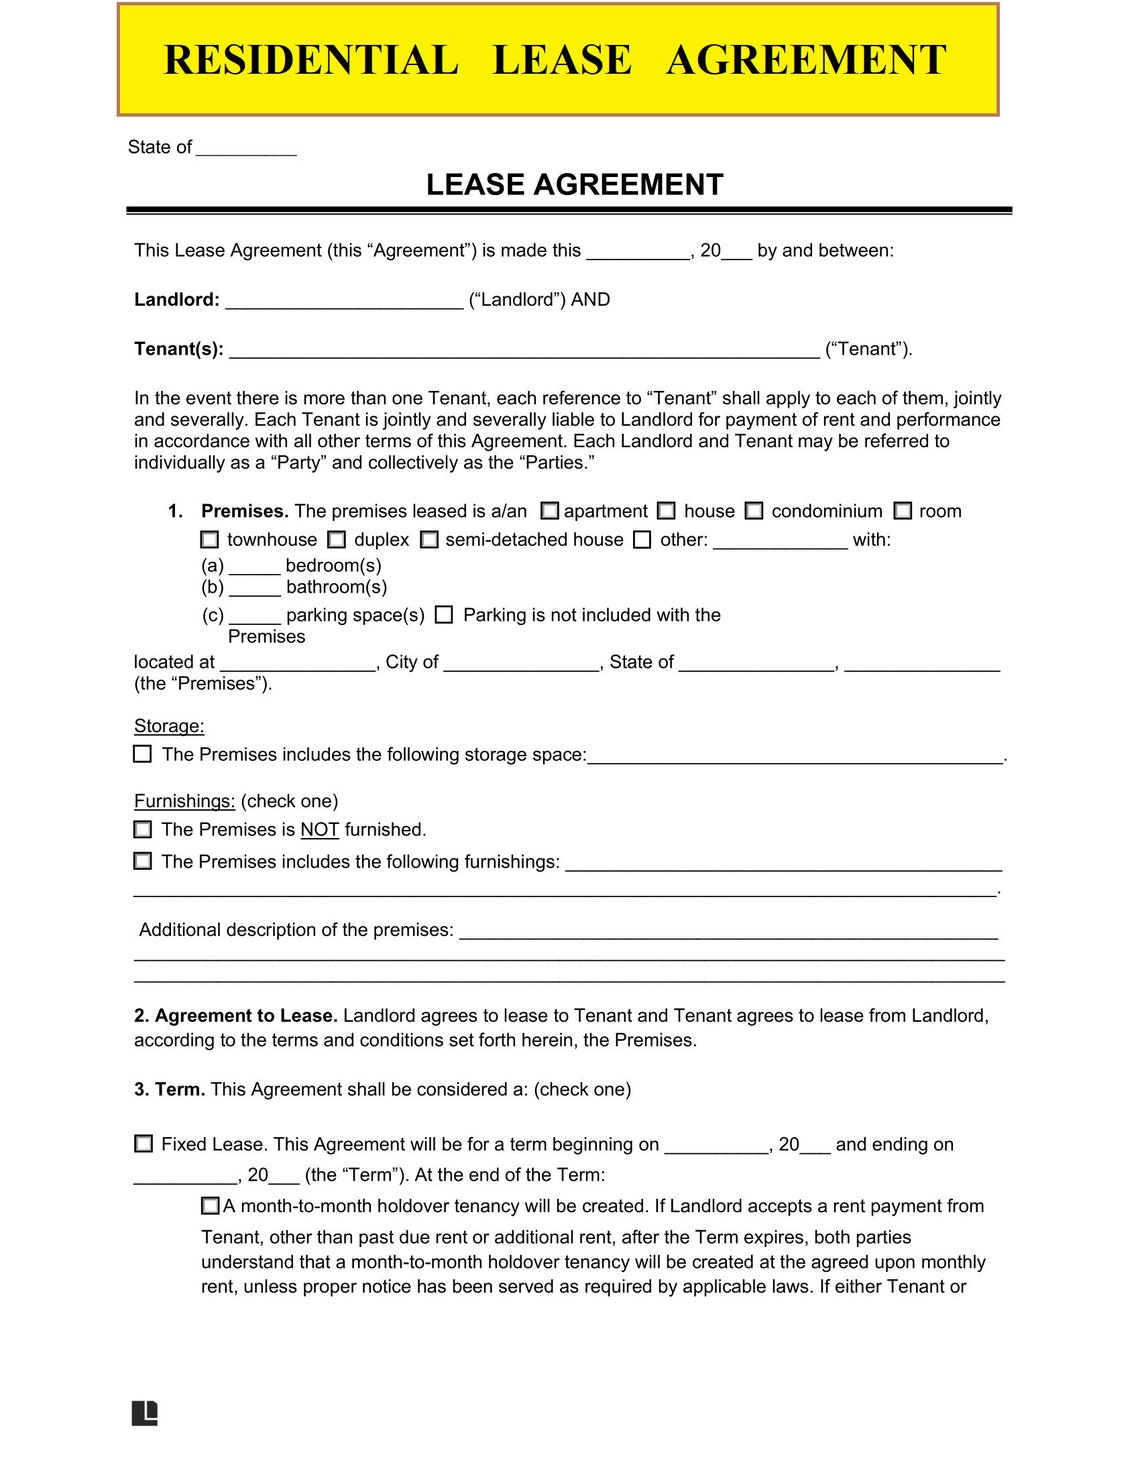 assignment of a residential lease